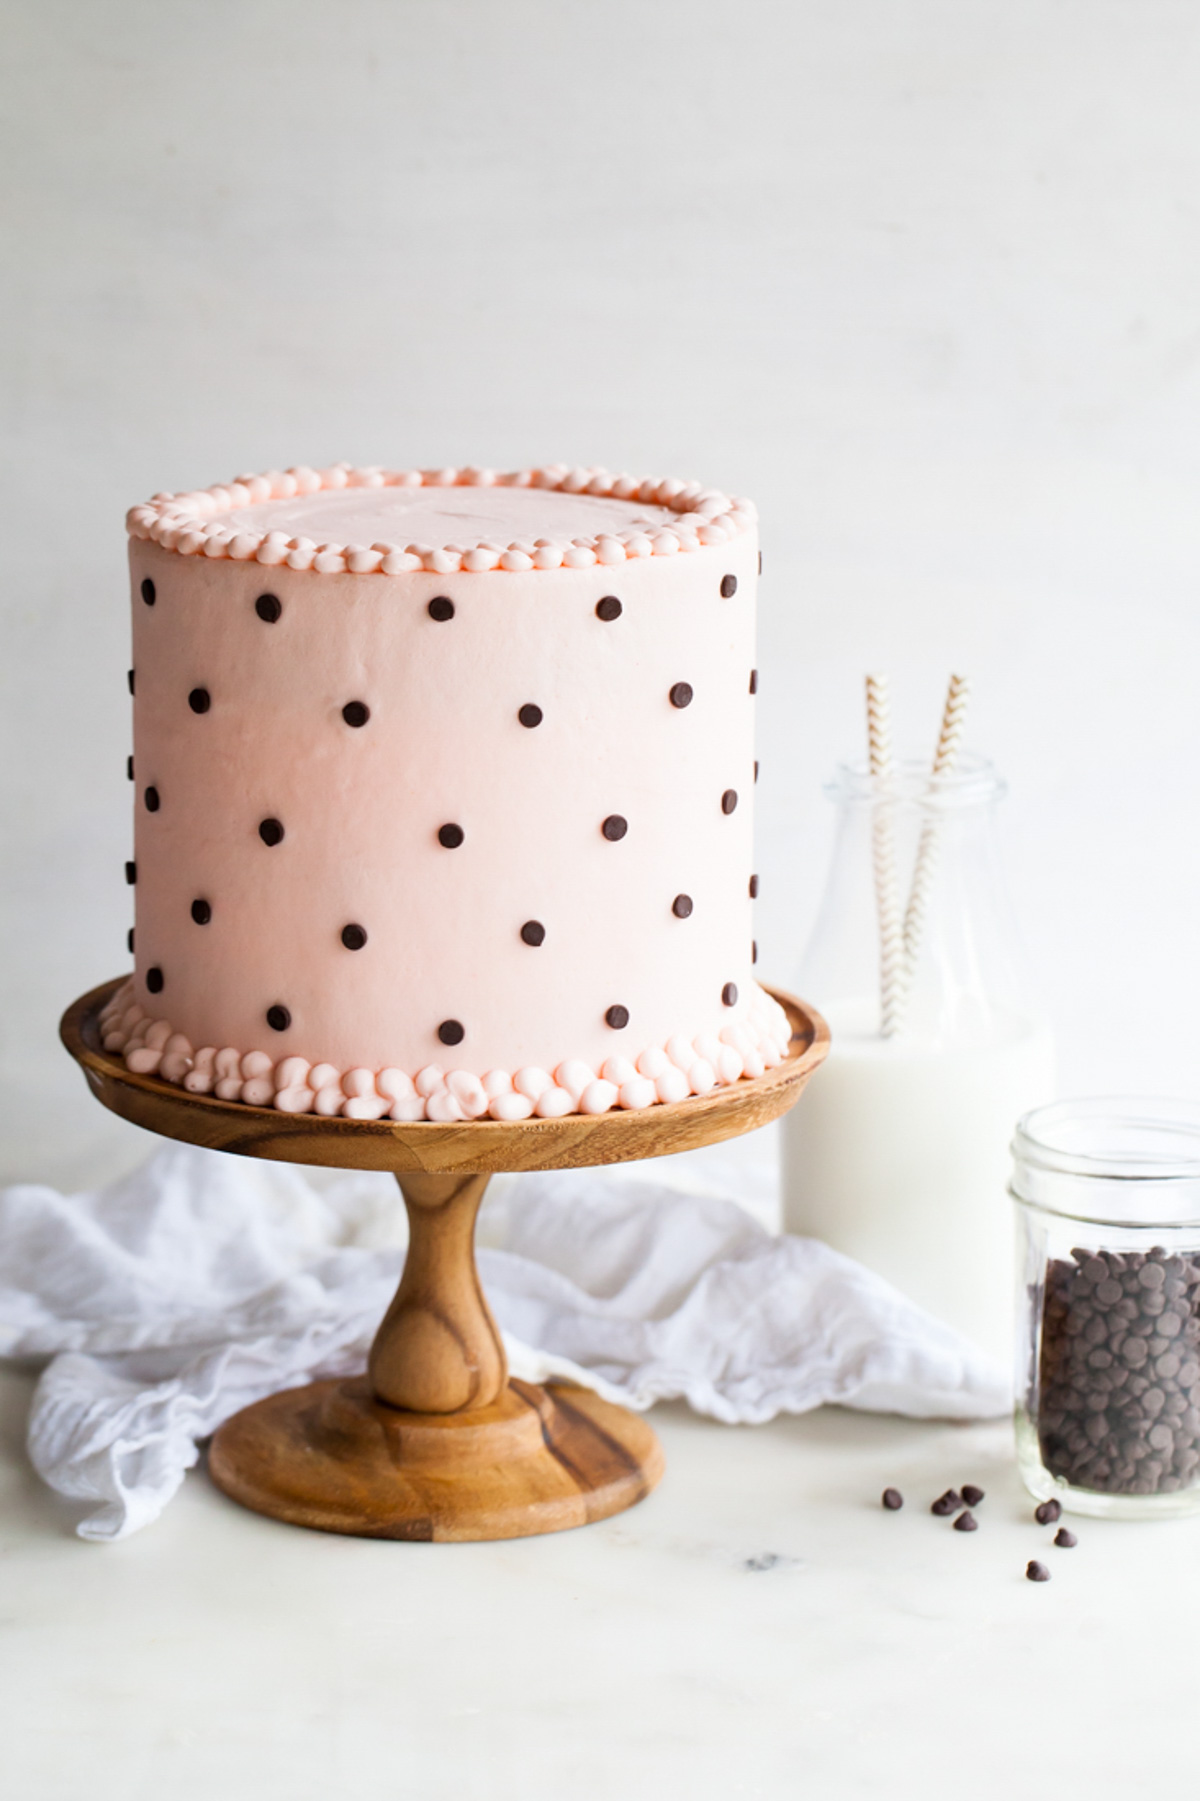 Pink Milk and Cookies Cake with chocolate chip polka dots on a wooden cake stand.